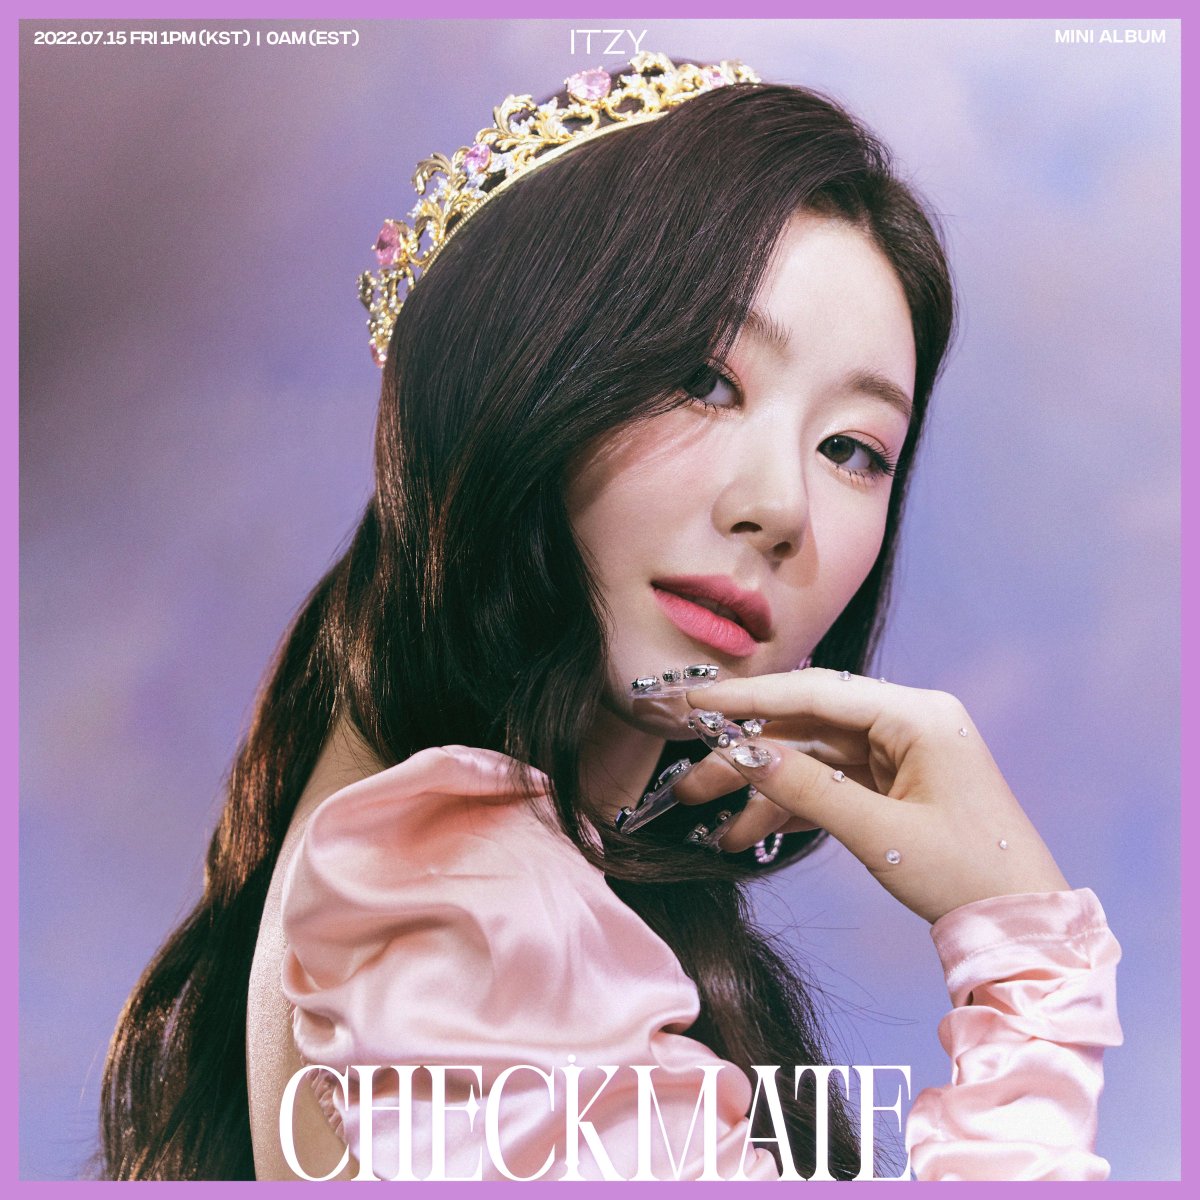 ITZYofficial: 𝐈𝐓𝐙𝐘 𝐂𝐎𝐍𝐂𝐄𝐏𝐓 𝐏𝐇𝐎𝐓𝐎 #2#채령 #CHAERYEONG👑 ALBUM  RELEASE2022.7.15 FRI 1PM(KST) | 0AM(EST)♟ PRE-SAVE & PRE-ORDER #MIDZY  @ITZYofficial#ITZYComeback#ITZY_CHECKMATE - kpop-track.com